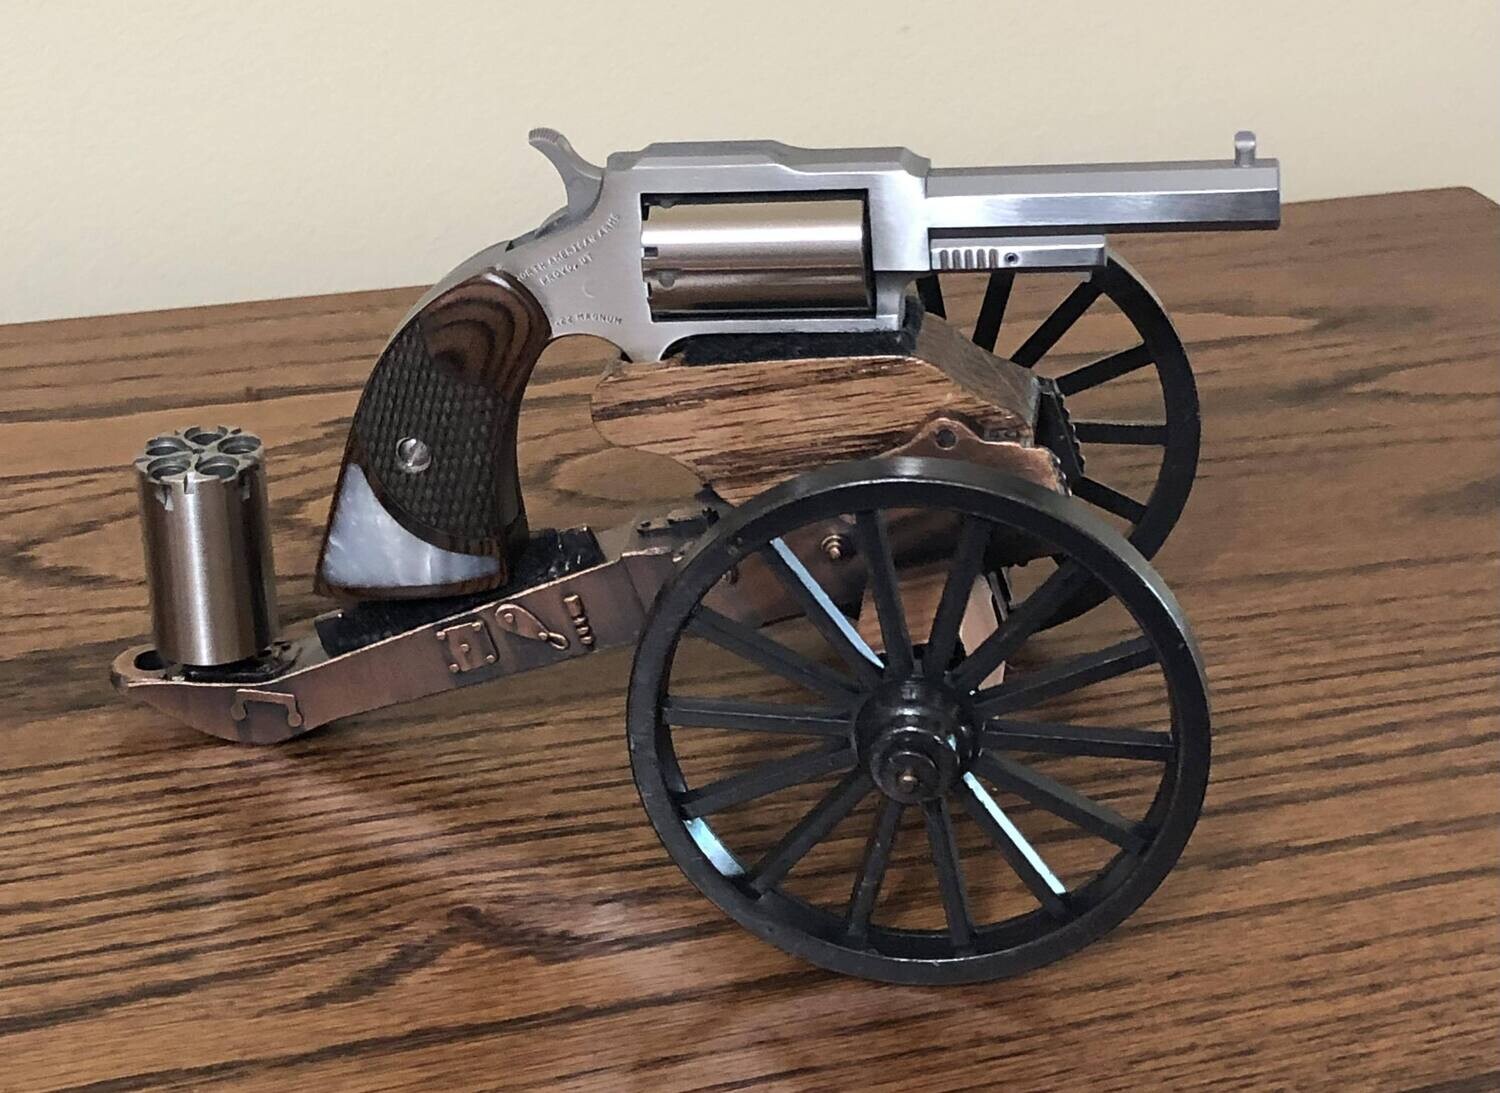 North American Arms Large (NAA) (.22 Magnum) Cannon Stand